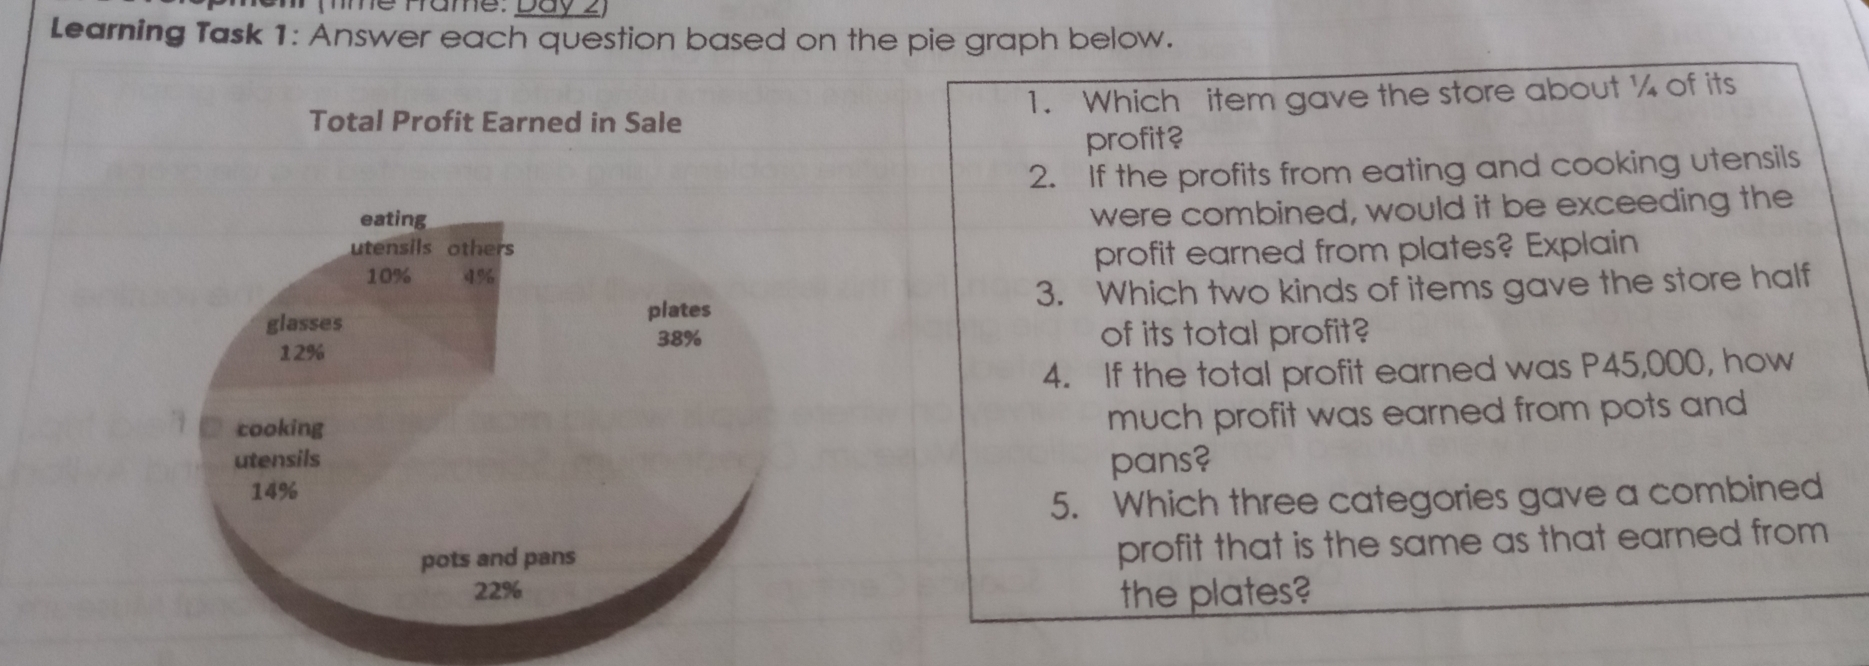 Learning Task 1: Answer each question based on the pie graph below. 1. Which item gave the store about % of its Total Profit Earned in Sale profit? 2. If the profits from eating and cooking utensils eating were combined, would it be exceeding the utensils others profit earned from plates? Explain 10% 4% glasses plates 3. Which two kinds of items gave the store half 12% 38% of its total profit? 4. If the total profit earned was P45,000, how cooking much profit was earned from pots and utensils pans? 14% 5. Which three categories gave a combined pots and pans profit that is the same as that earned from 22% the plates?